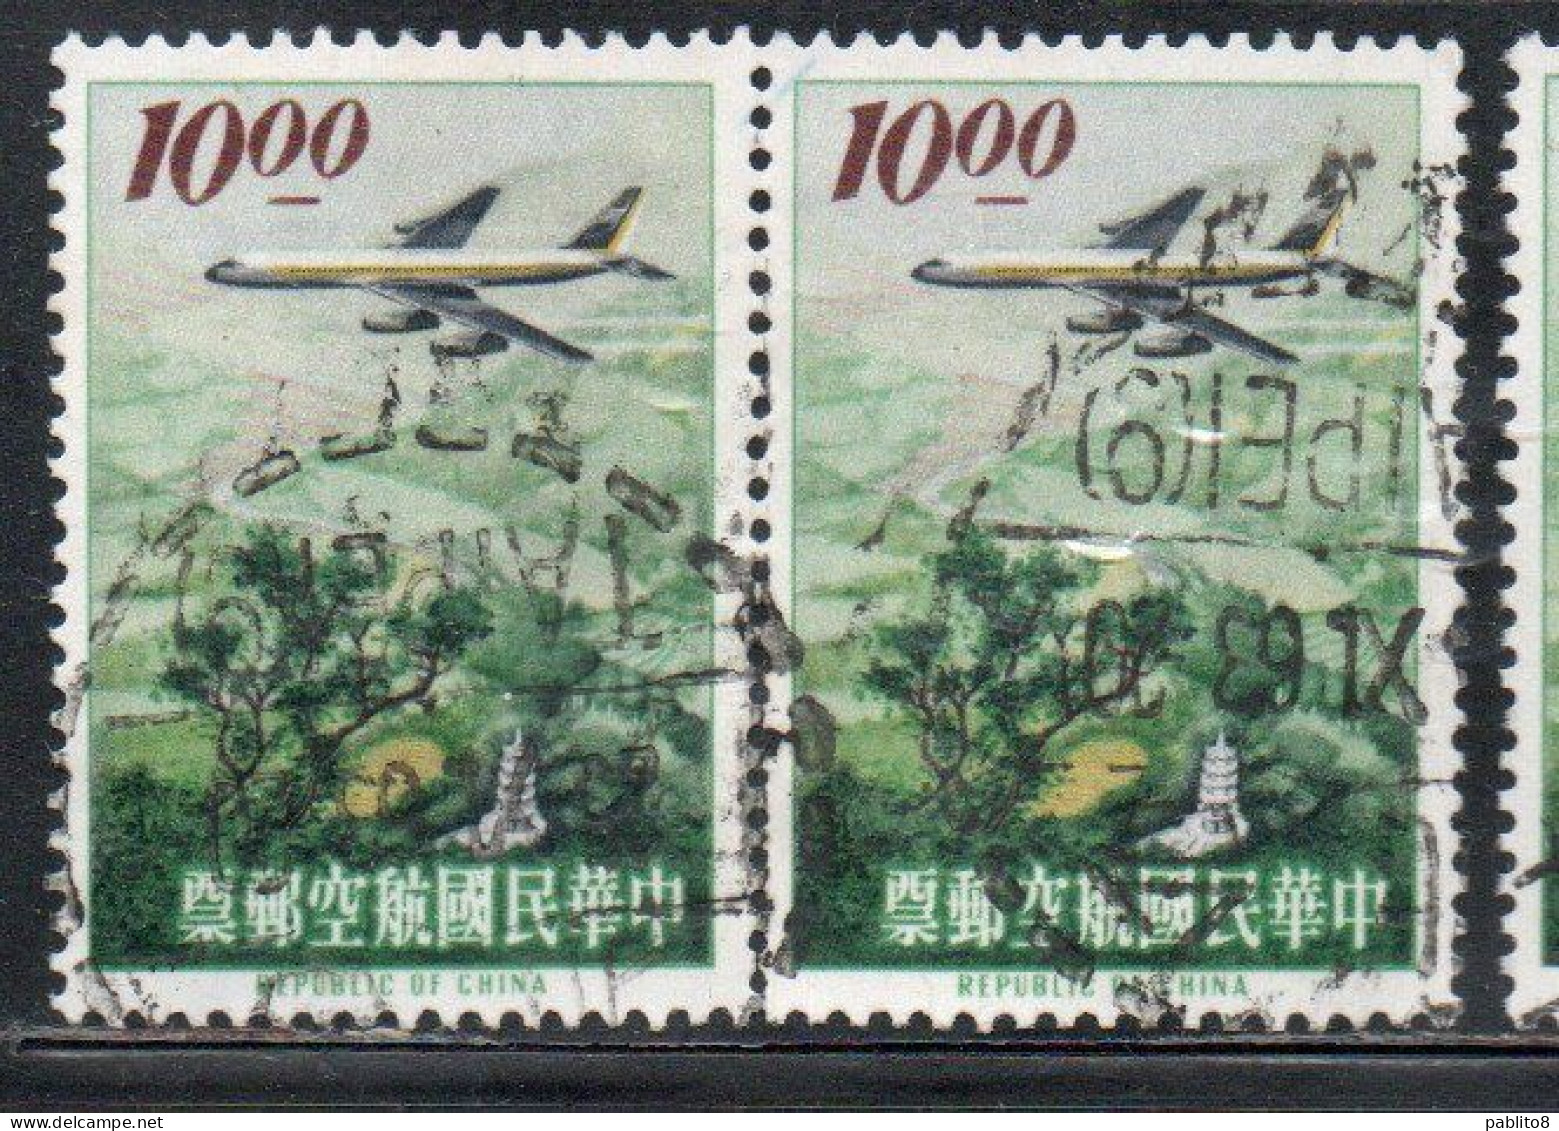 CHINA REPUBLIC CINA TAIWAN FORMOSA 1963 AIR POST MAIL AIRMAIL JET OVER LION HEAD MOUNTAIN SINCHU 10$ USED USATO OBLITERE - Airmail